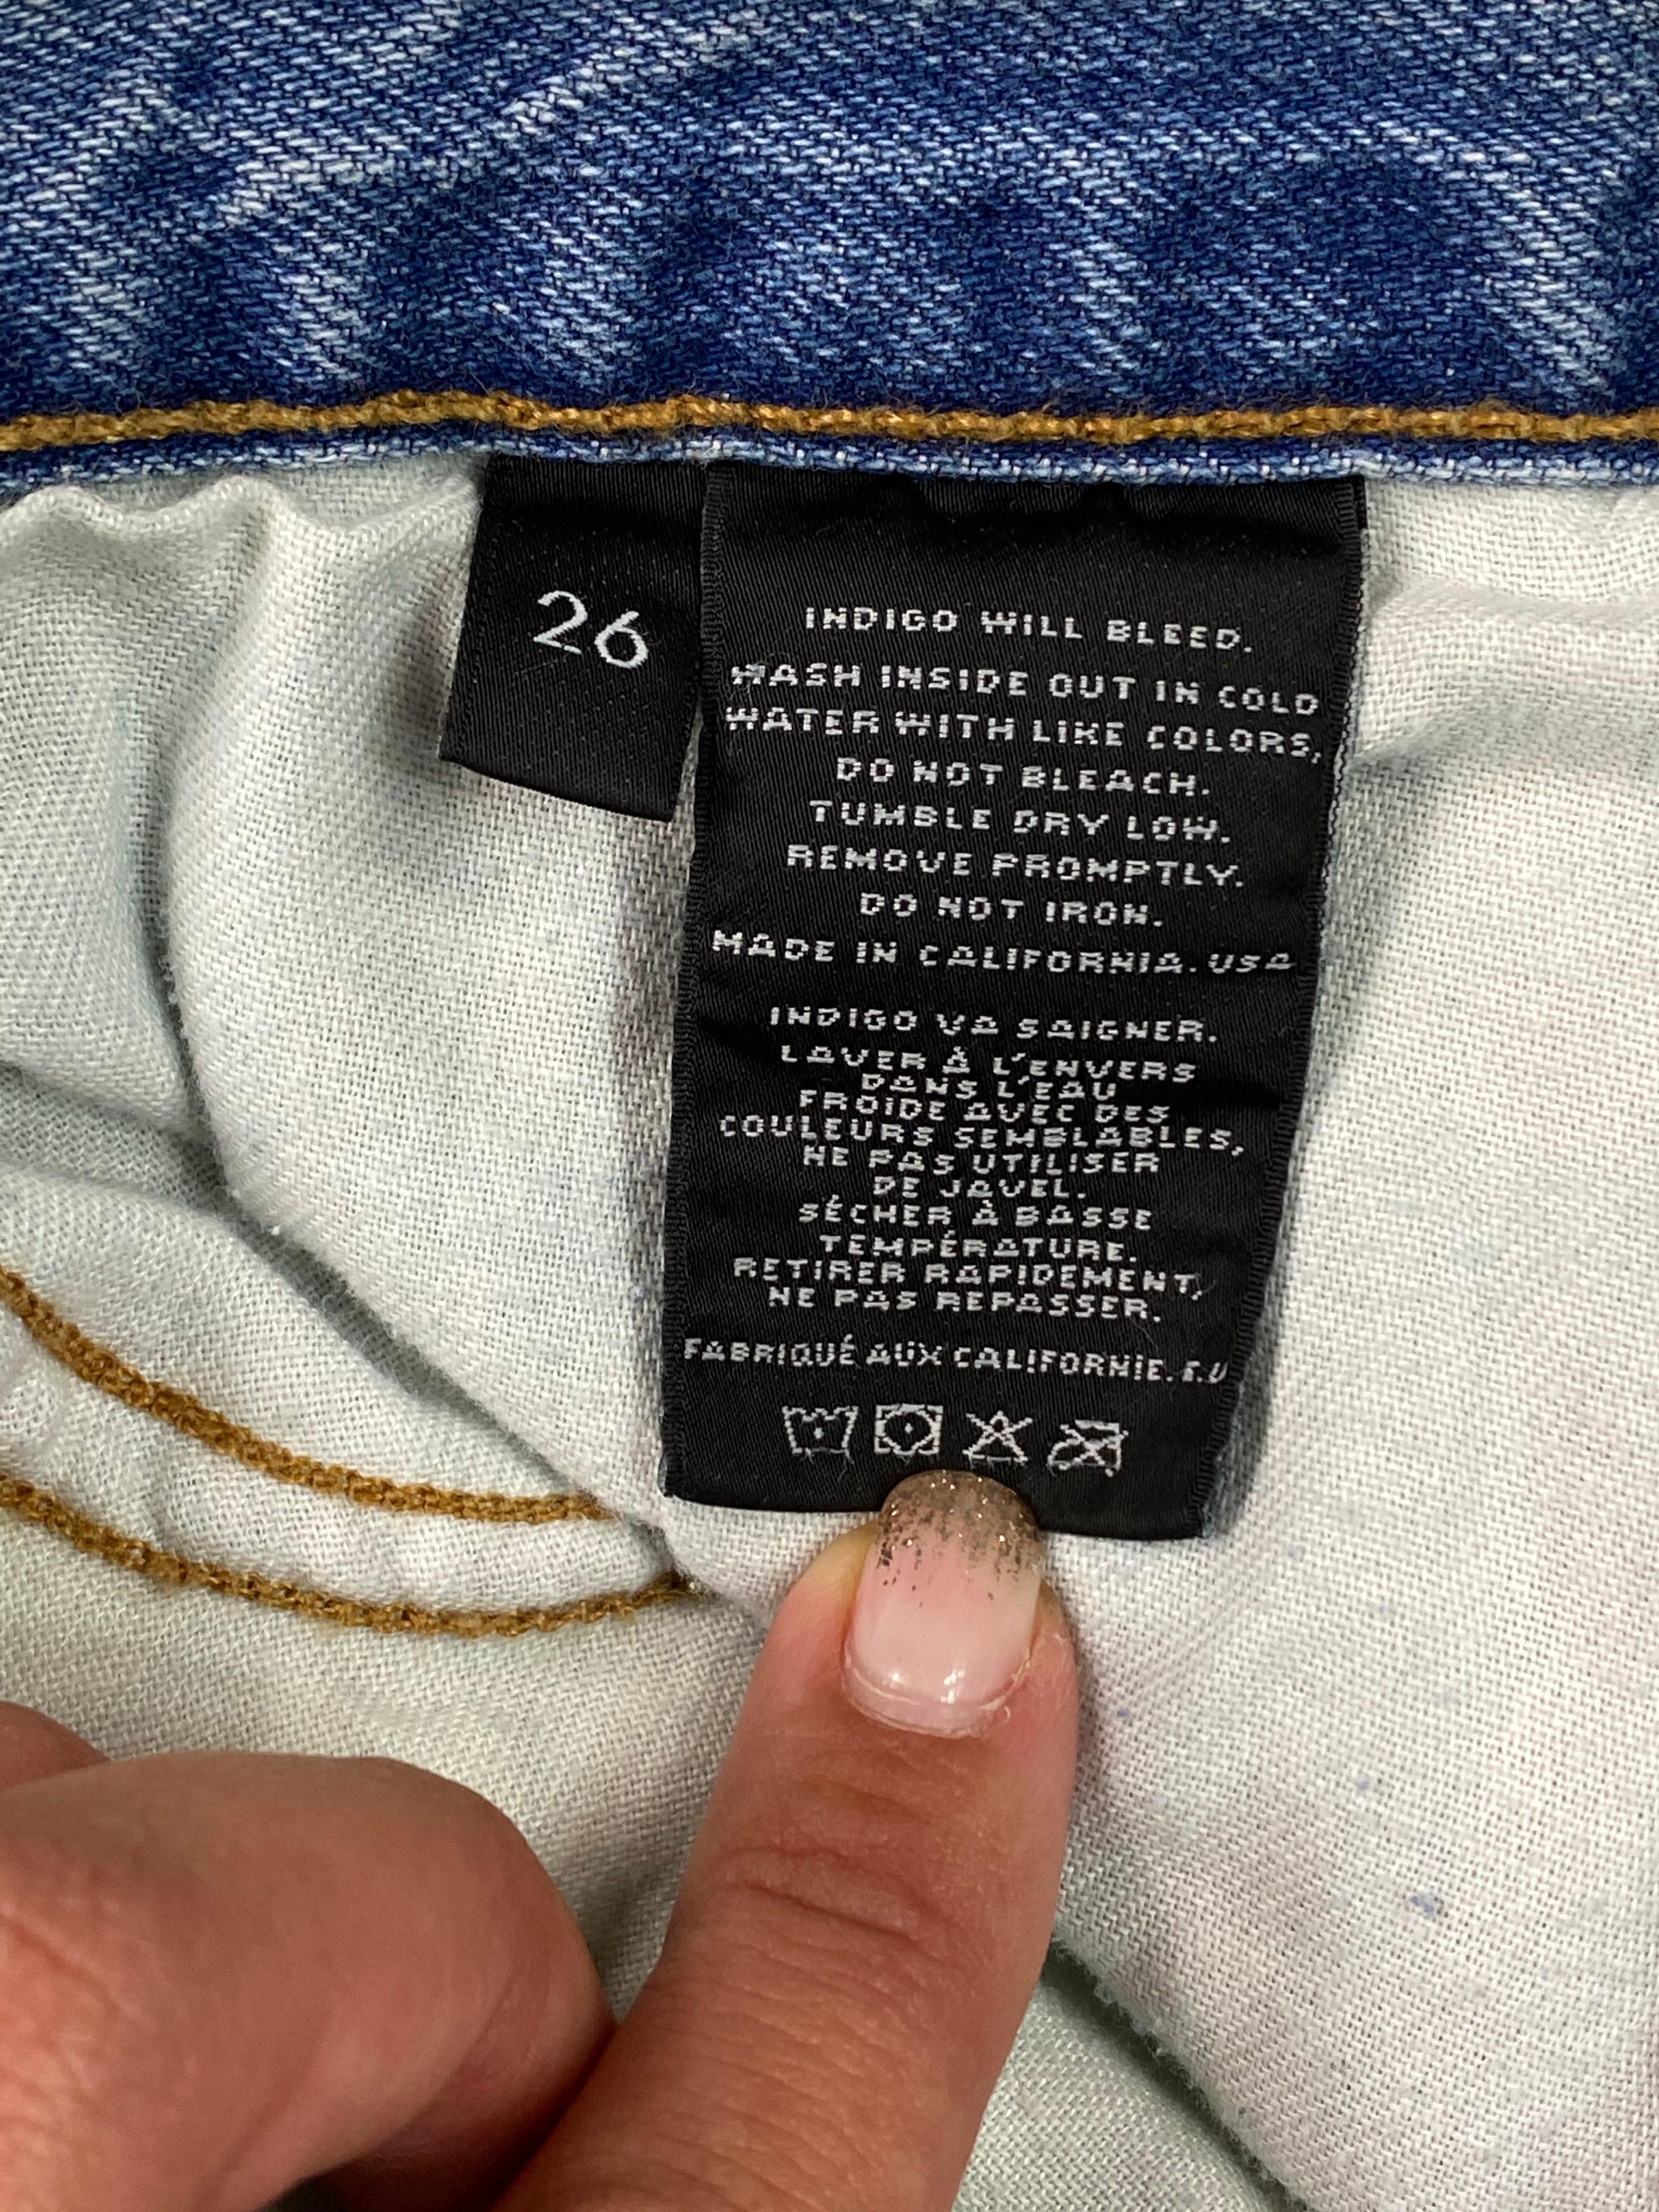 size 26 pants in us